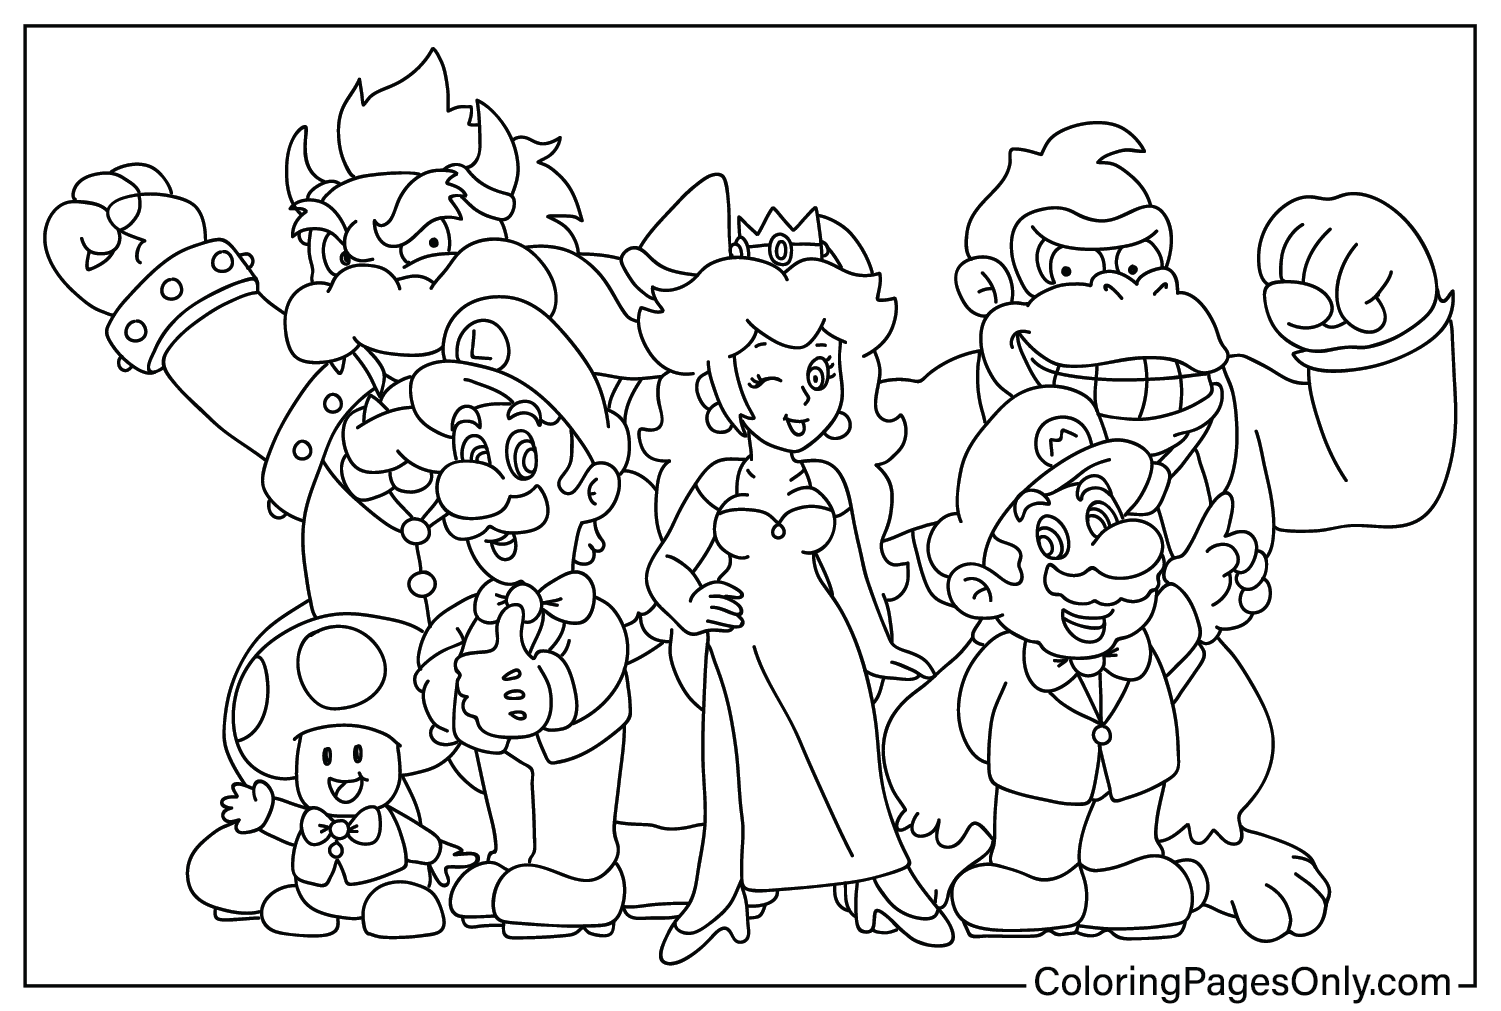 Super Mario Bros. Movie Coloring Pages - Free Printable Coloring Pages